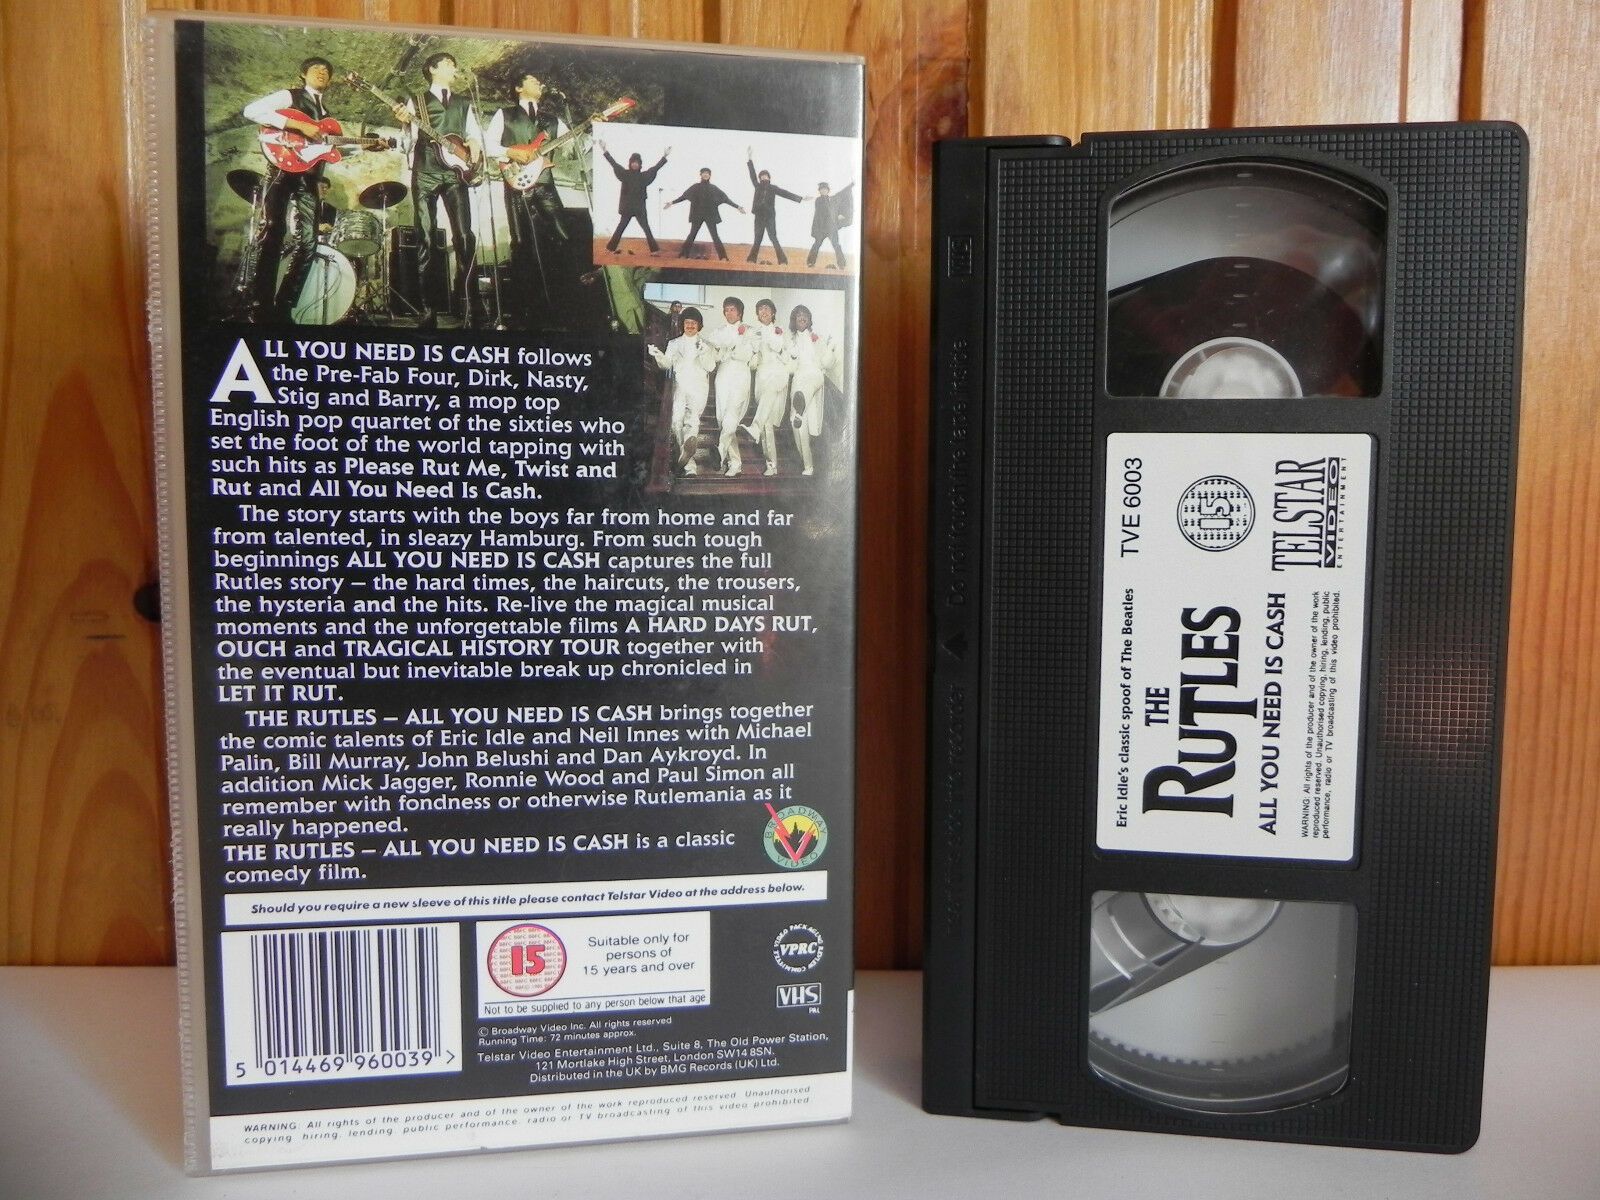 The Rutles - All You Need Is Cash - Beetles Exploit - Comedy - Eric Idle - VHS-